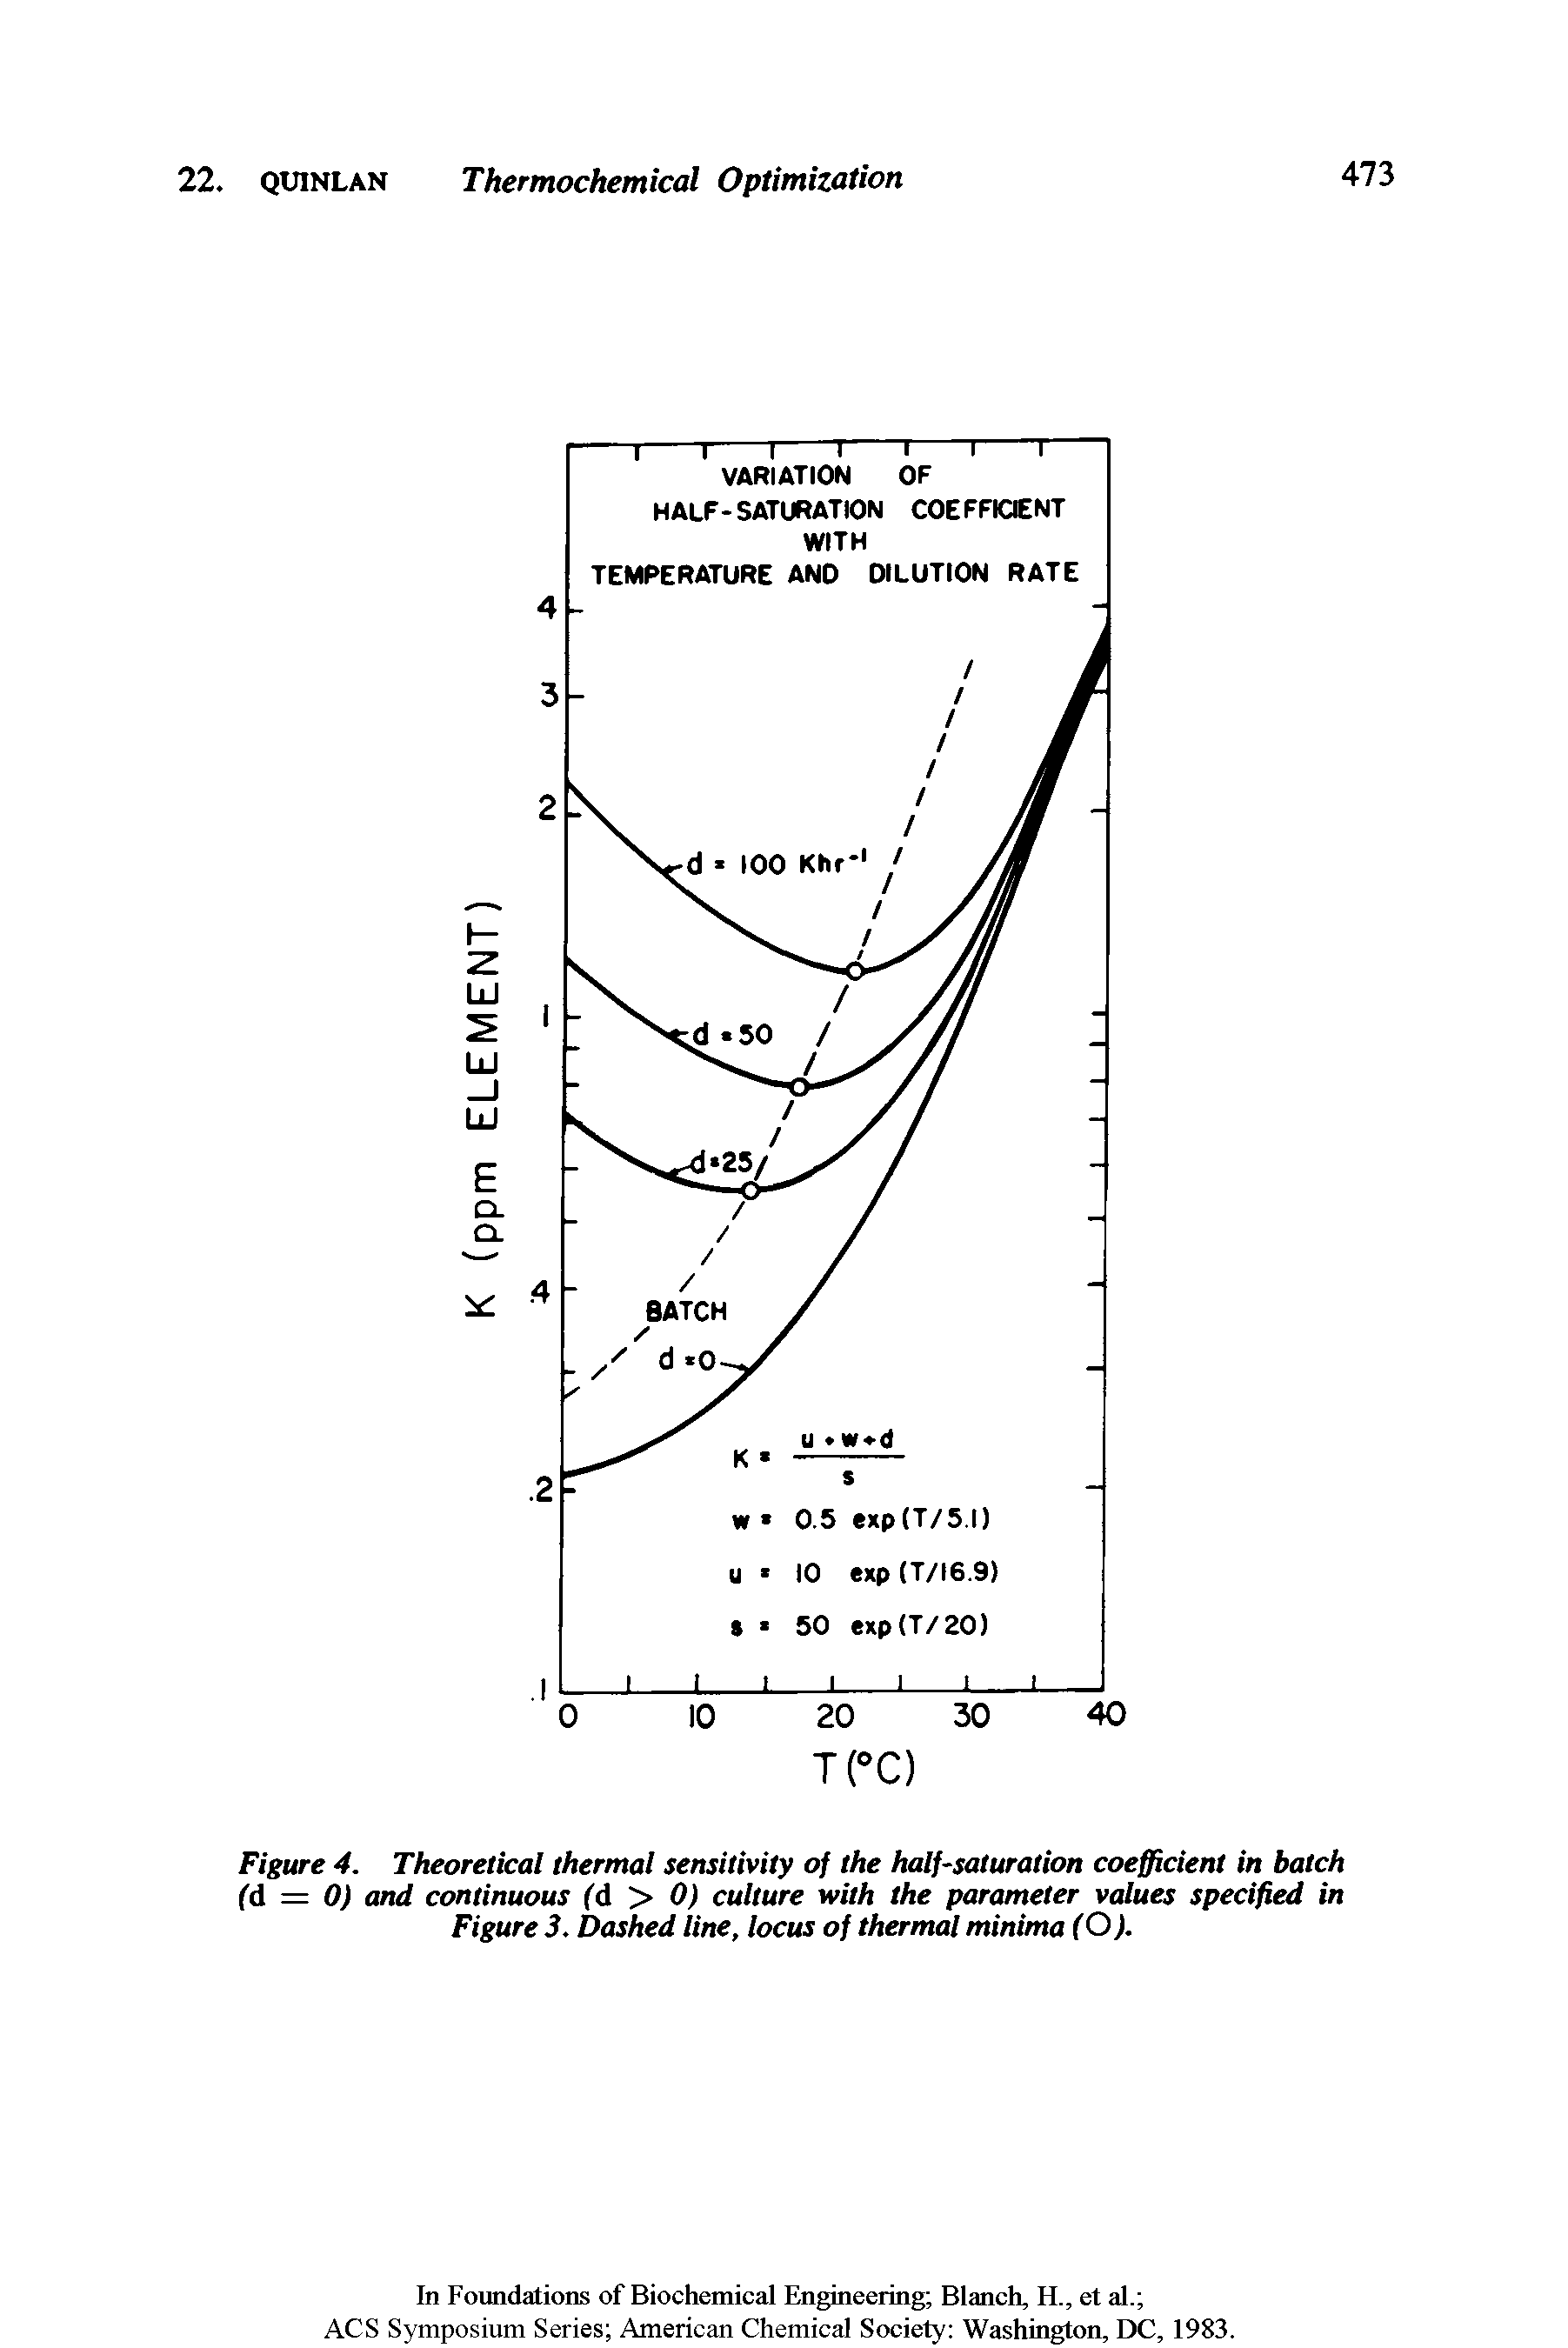 Figure 4. Theoretical thermal sensitivity of the half-saturation coefficient in batch (d = 0) and continuous (d > 0) culture with the parameter values specified in Figure 3. Dashed line, locus of thermal minima (O).